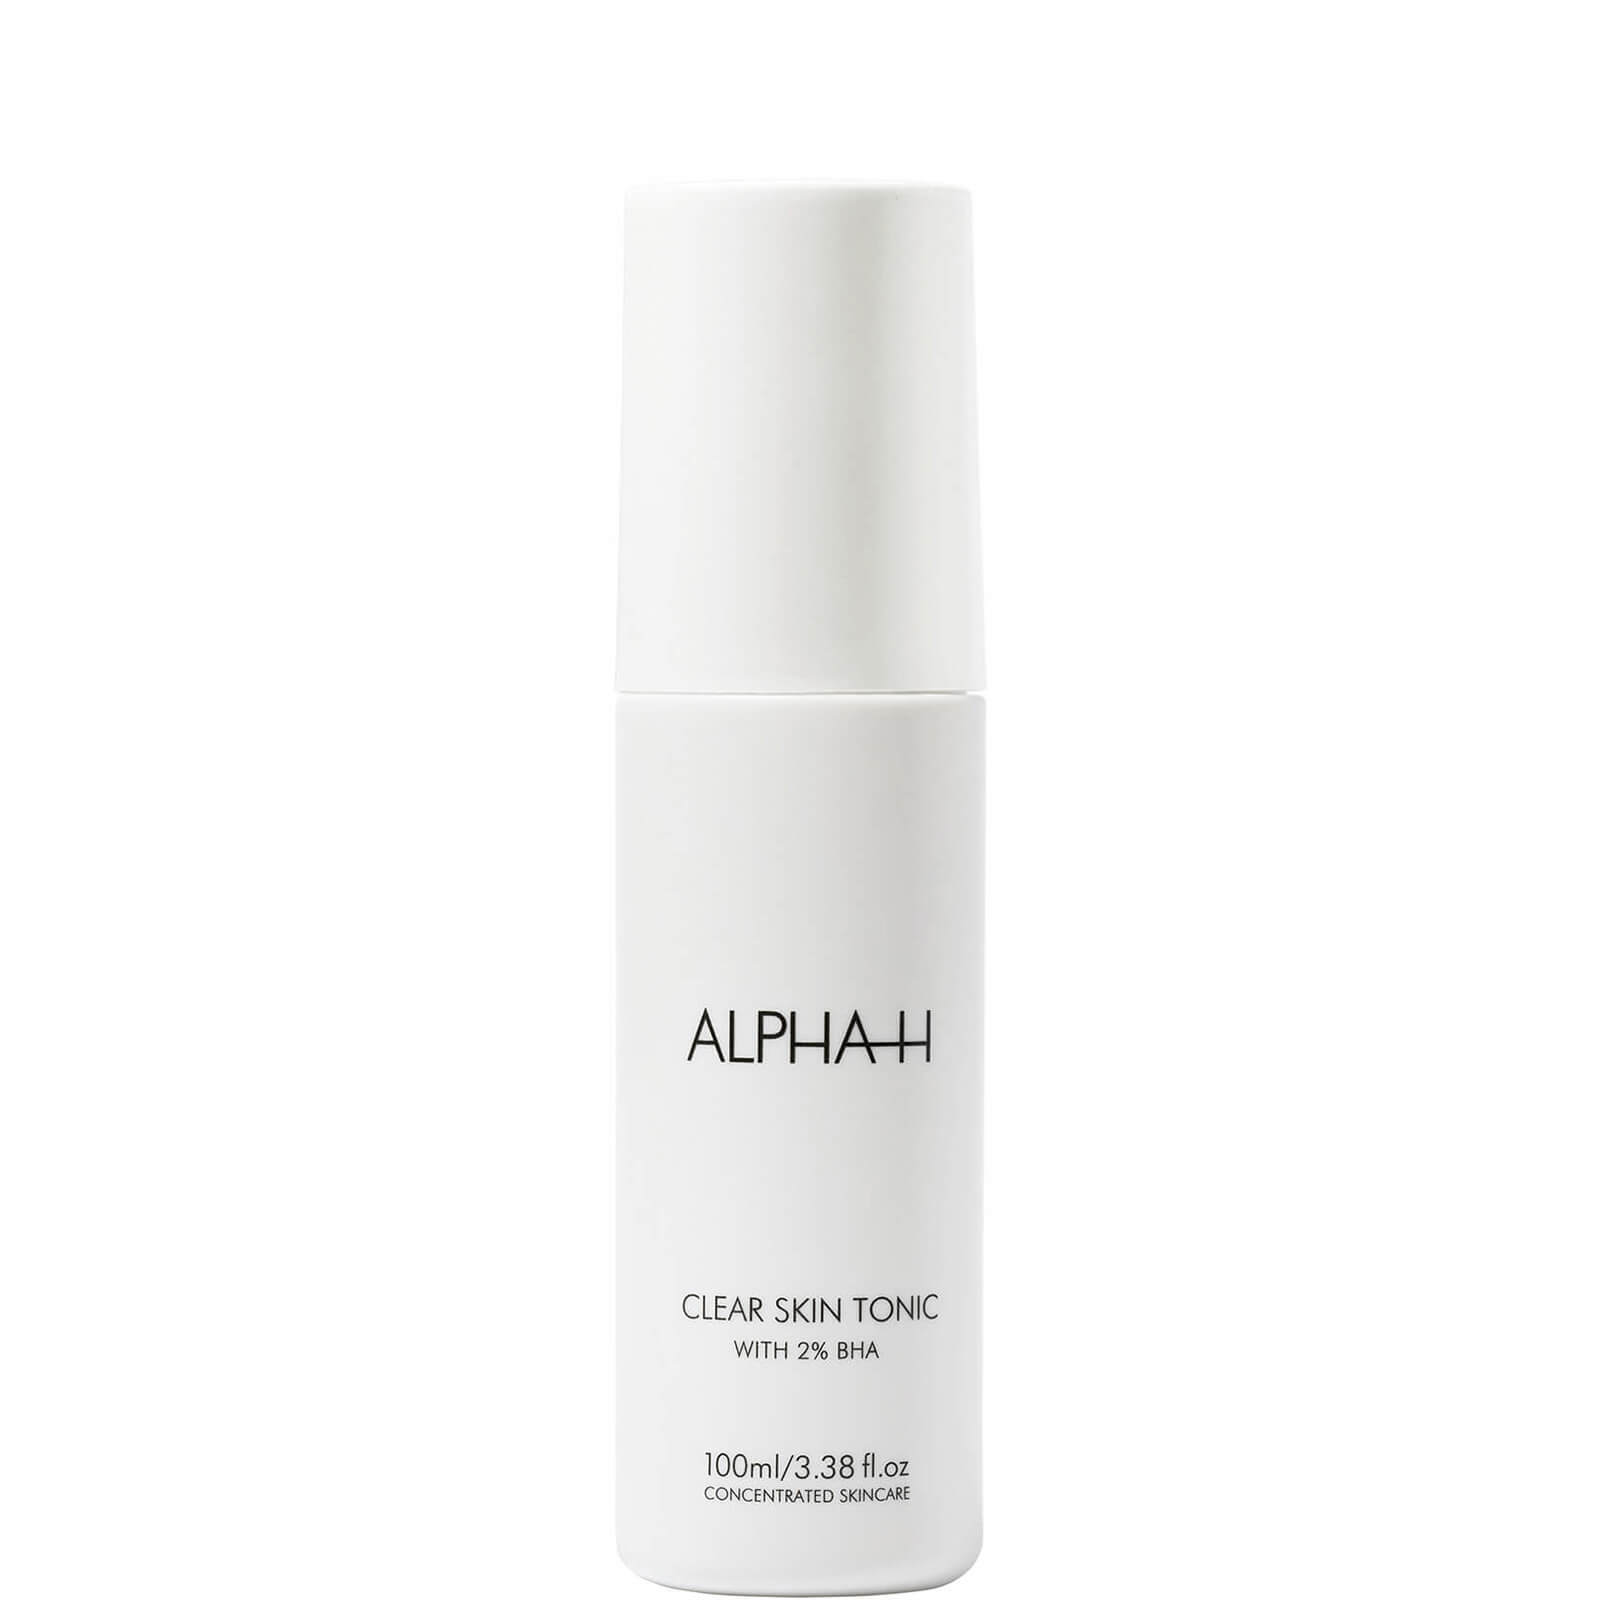 Photos - Facial / Body Cleansing Product Alpha-H Clear Skin Tonic 100ml